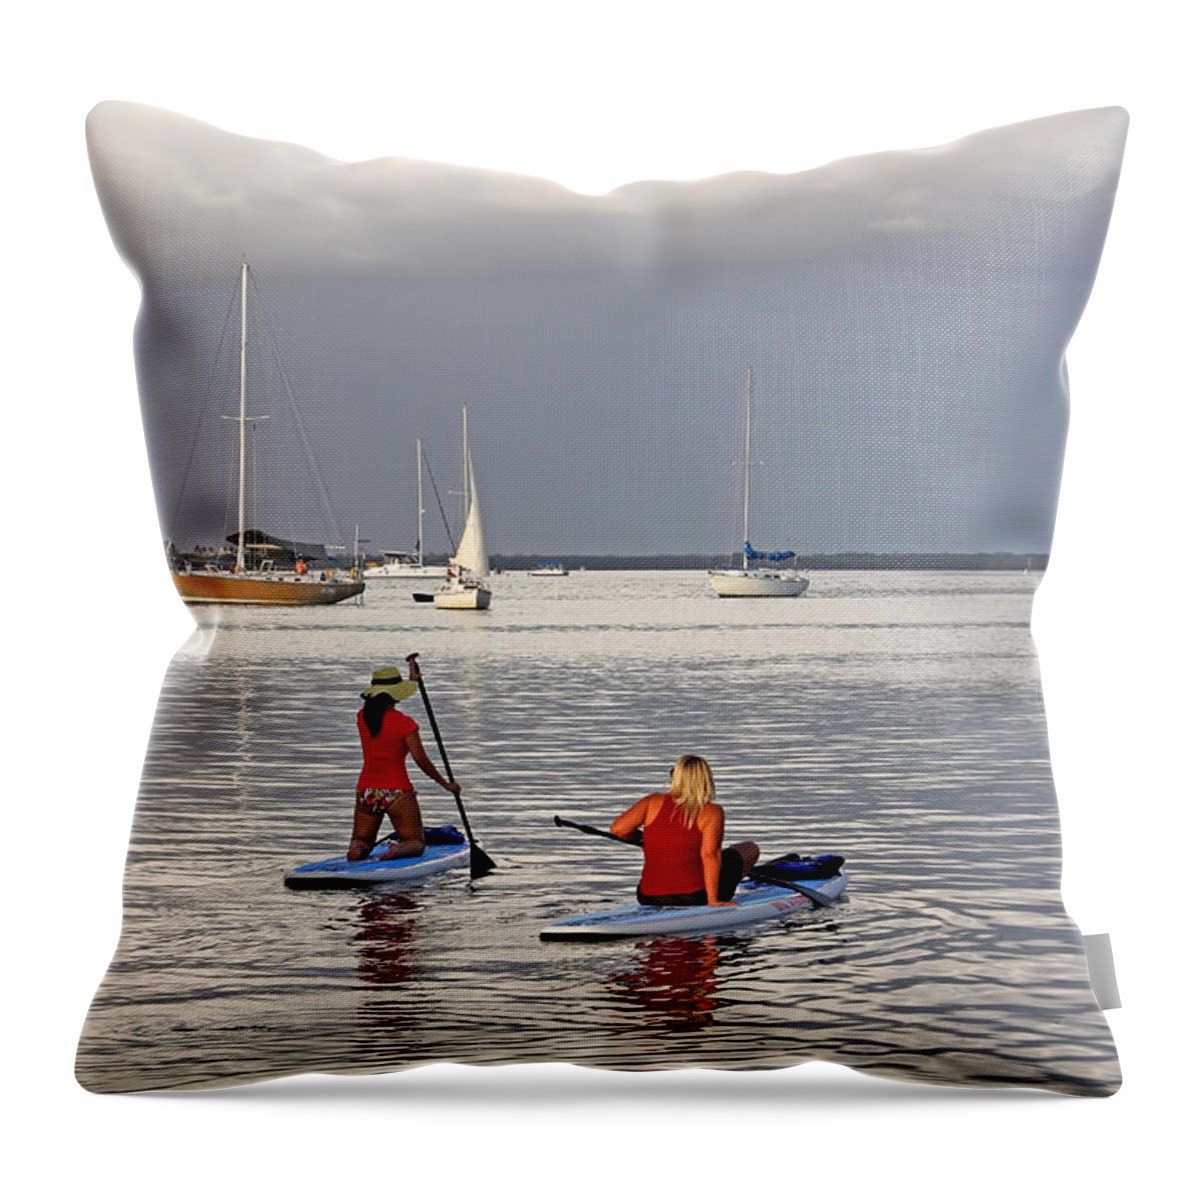 Paddleboarding Throw Pillow featuring the photograph Summertime Fun by HH Photography of Florida